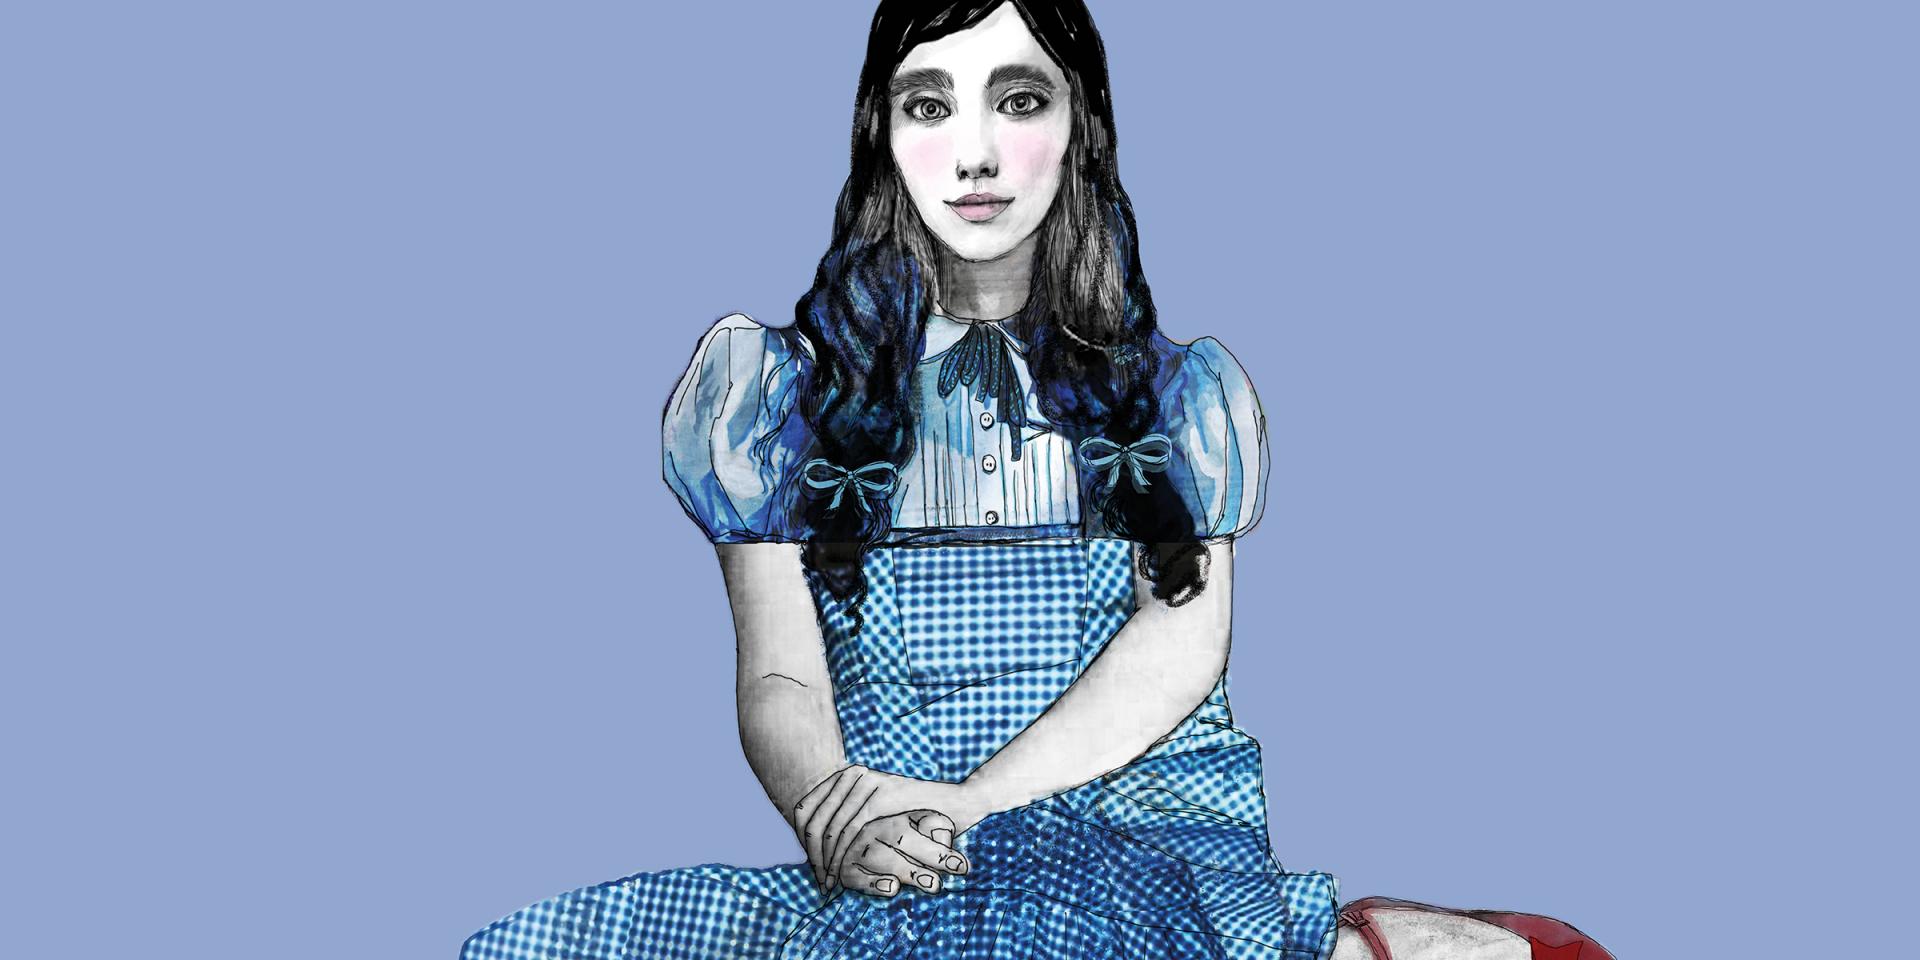 Illustration by Sara Rambaldi for The Wizard of Oz